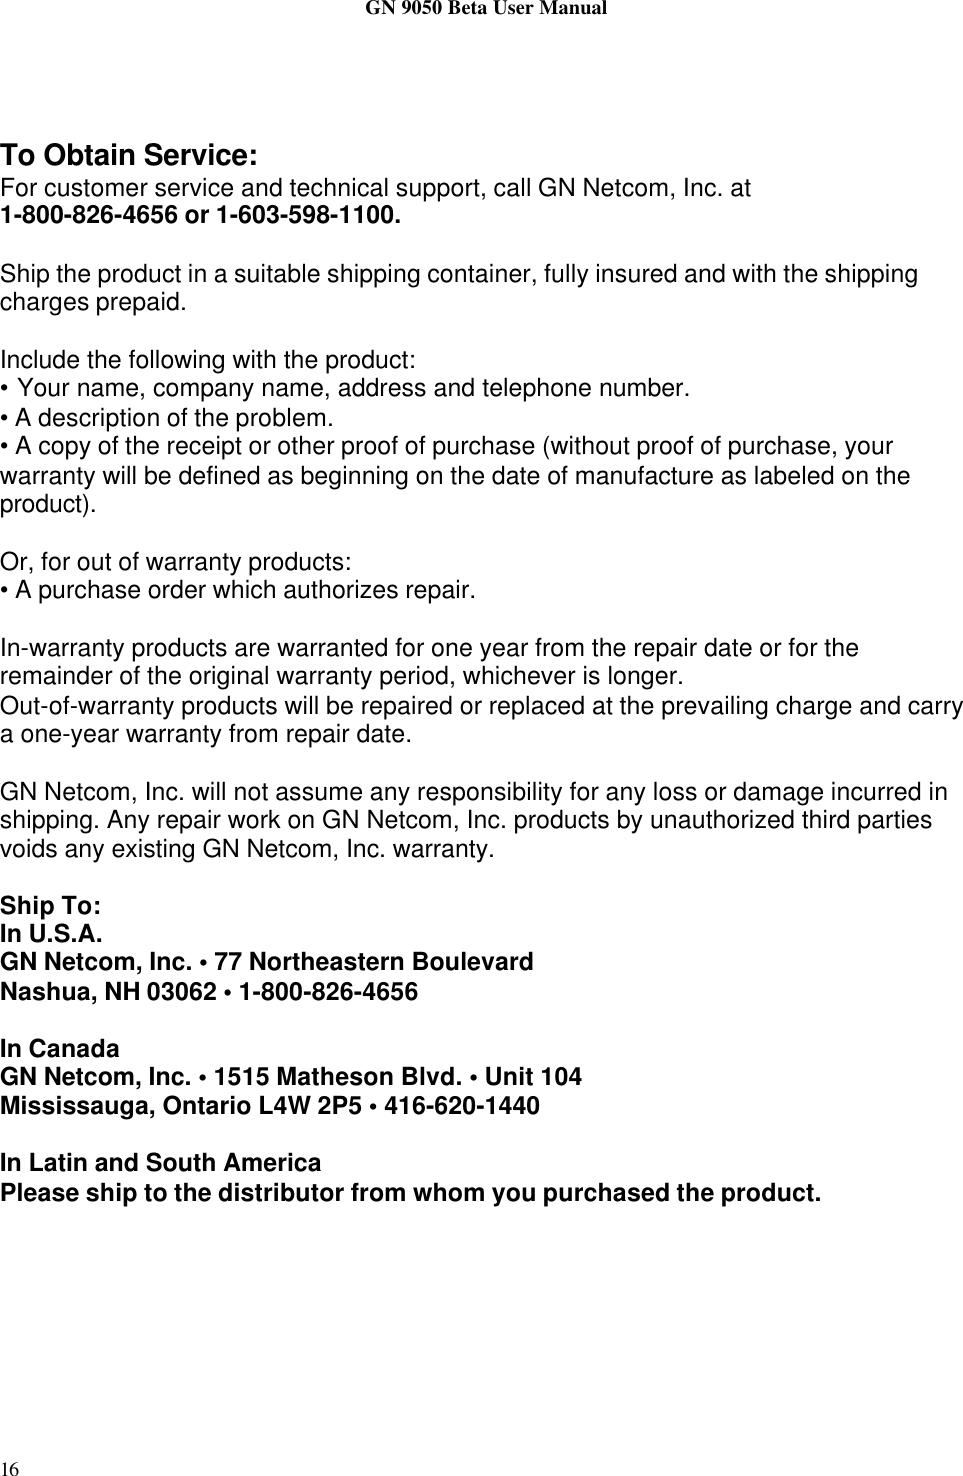 GN 9050 Beta User Manual16To Obtain Service:For customer service and technical support, call GN Netcom, Inc. at1-800-826-4656 or 1-603-598-1100.Ship the product in a suitable shipping container, fully insured and with the shippingcharges prepaid.Include the following with the product:• Your name, company name, address and telephone number.• A description of the problem.• A copy of the receipt or other proof of purchase (without proof of purchase, yourwarranty will be defined as beginning on the date of manufacture as labeled on theproduct).Or, for out of warranty products:• A purchase order which authorizes repair.In-warranty products are warranted for one year from the repair date or for theremainder of the original warranty period, whichever is longer.Out-of-warranty products will be repaired or replaced at the prevailing charge and carrya one-year warranty from repair date.GN Netcom, Inc. will not assume any responsibility for any loss or damage incurred inshipping. Any repair work on GN Netcom, Inc. products by unauthorized third partiesvoids any existing GN Netcom, Inc. warranty.Ship To:In U.S.A.GN Netcom, Inc. • 77 Northeastern BoulevardNashua, NH 03062 • 1-800-826-4656In CanadaGN Netcom, Inc. • 1515 Matheson Blvd. • Unit 104Mississauga, Ontario L4W 2P5 • 416-620-1440In Latin and South AmericaPlease ship to the distributor from whom you purchased the product.